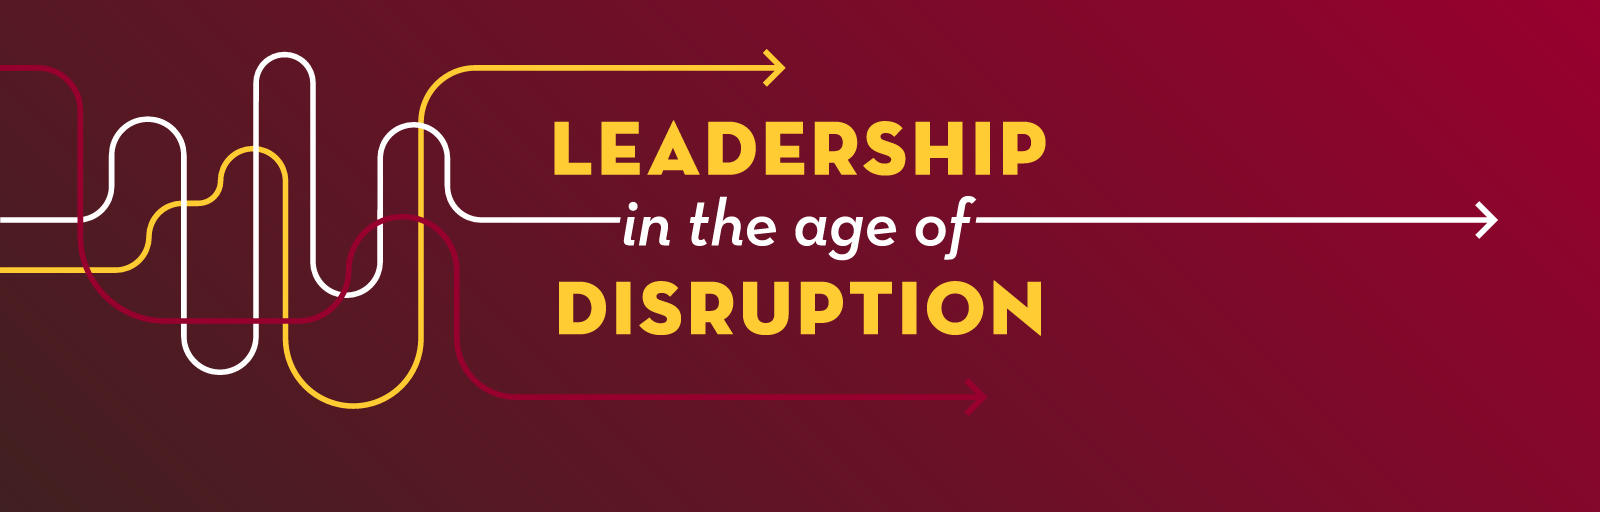 Leadership in the Age of Disruption | Carlson School of